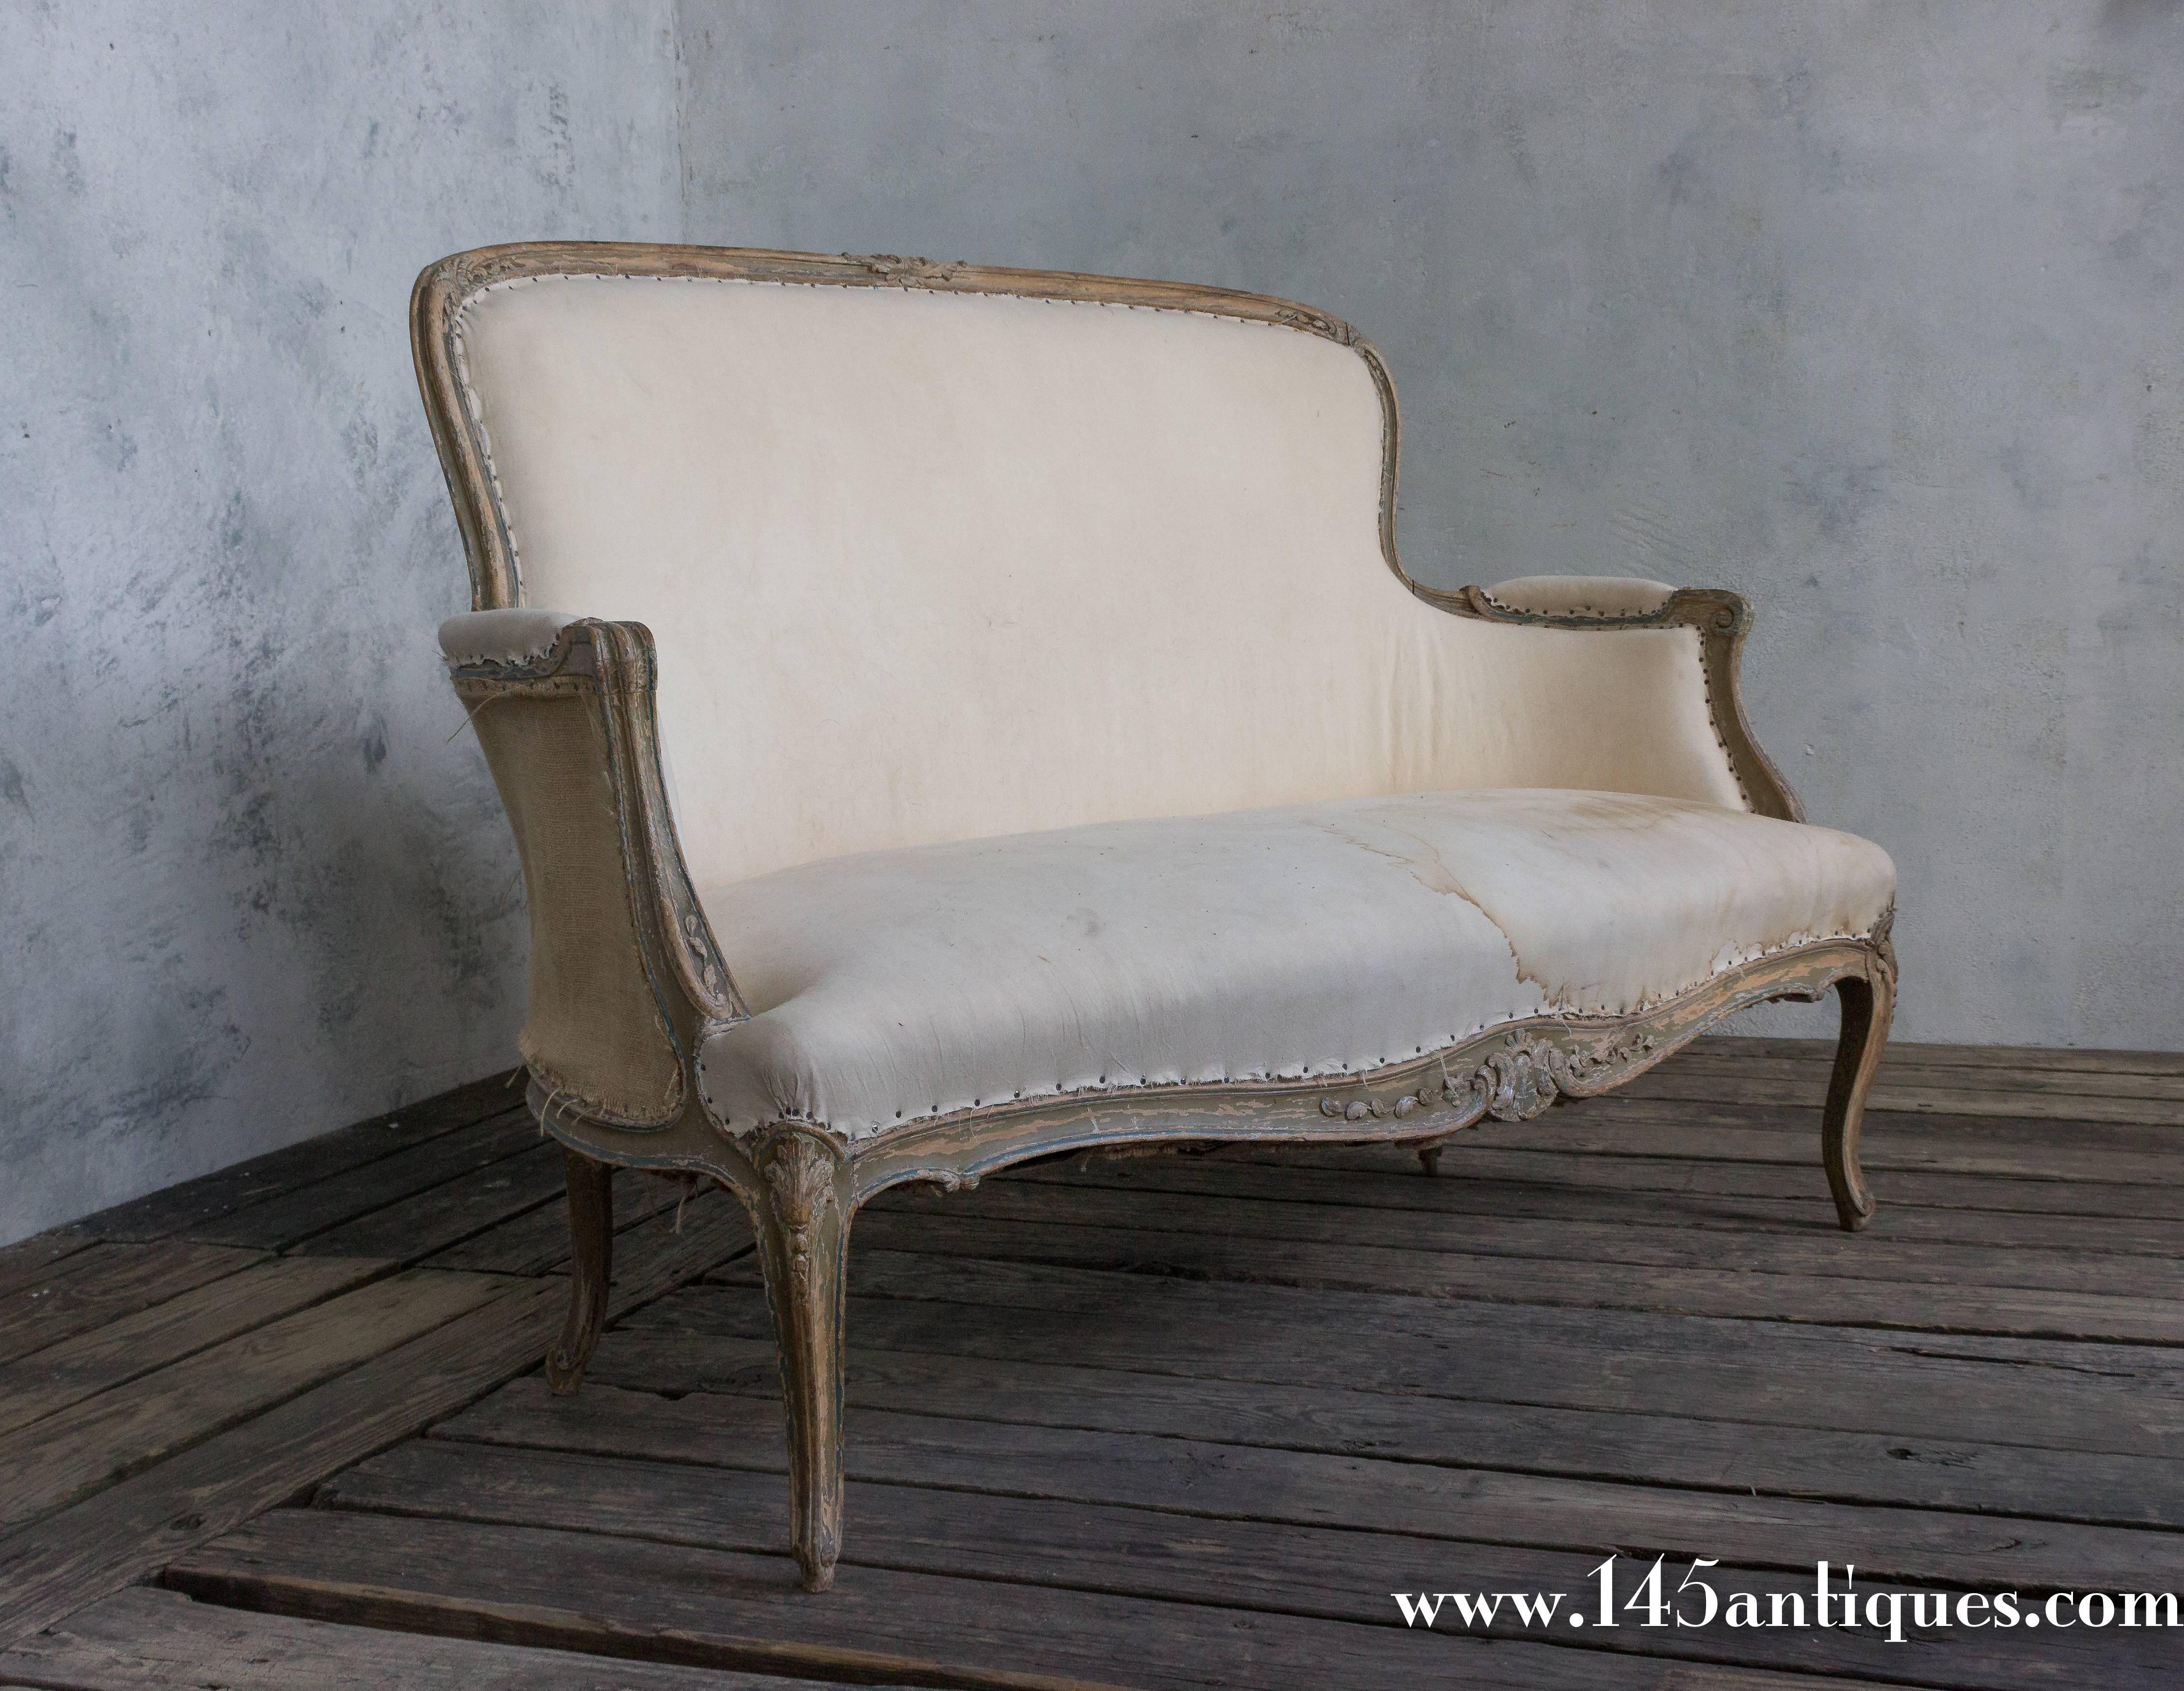 French Small 19th Century Settee with Distressed Paint Finish